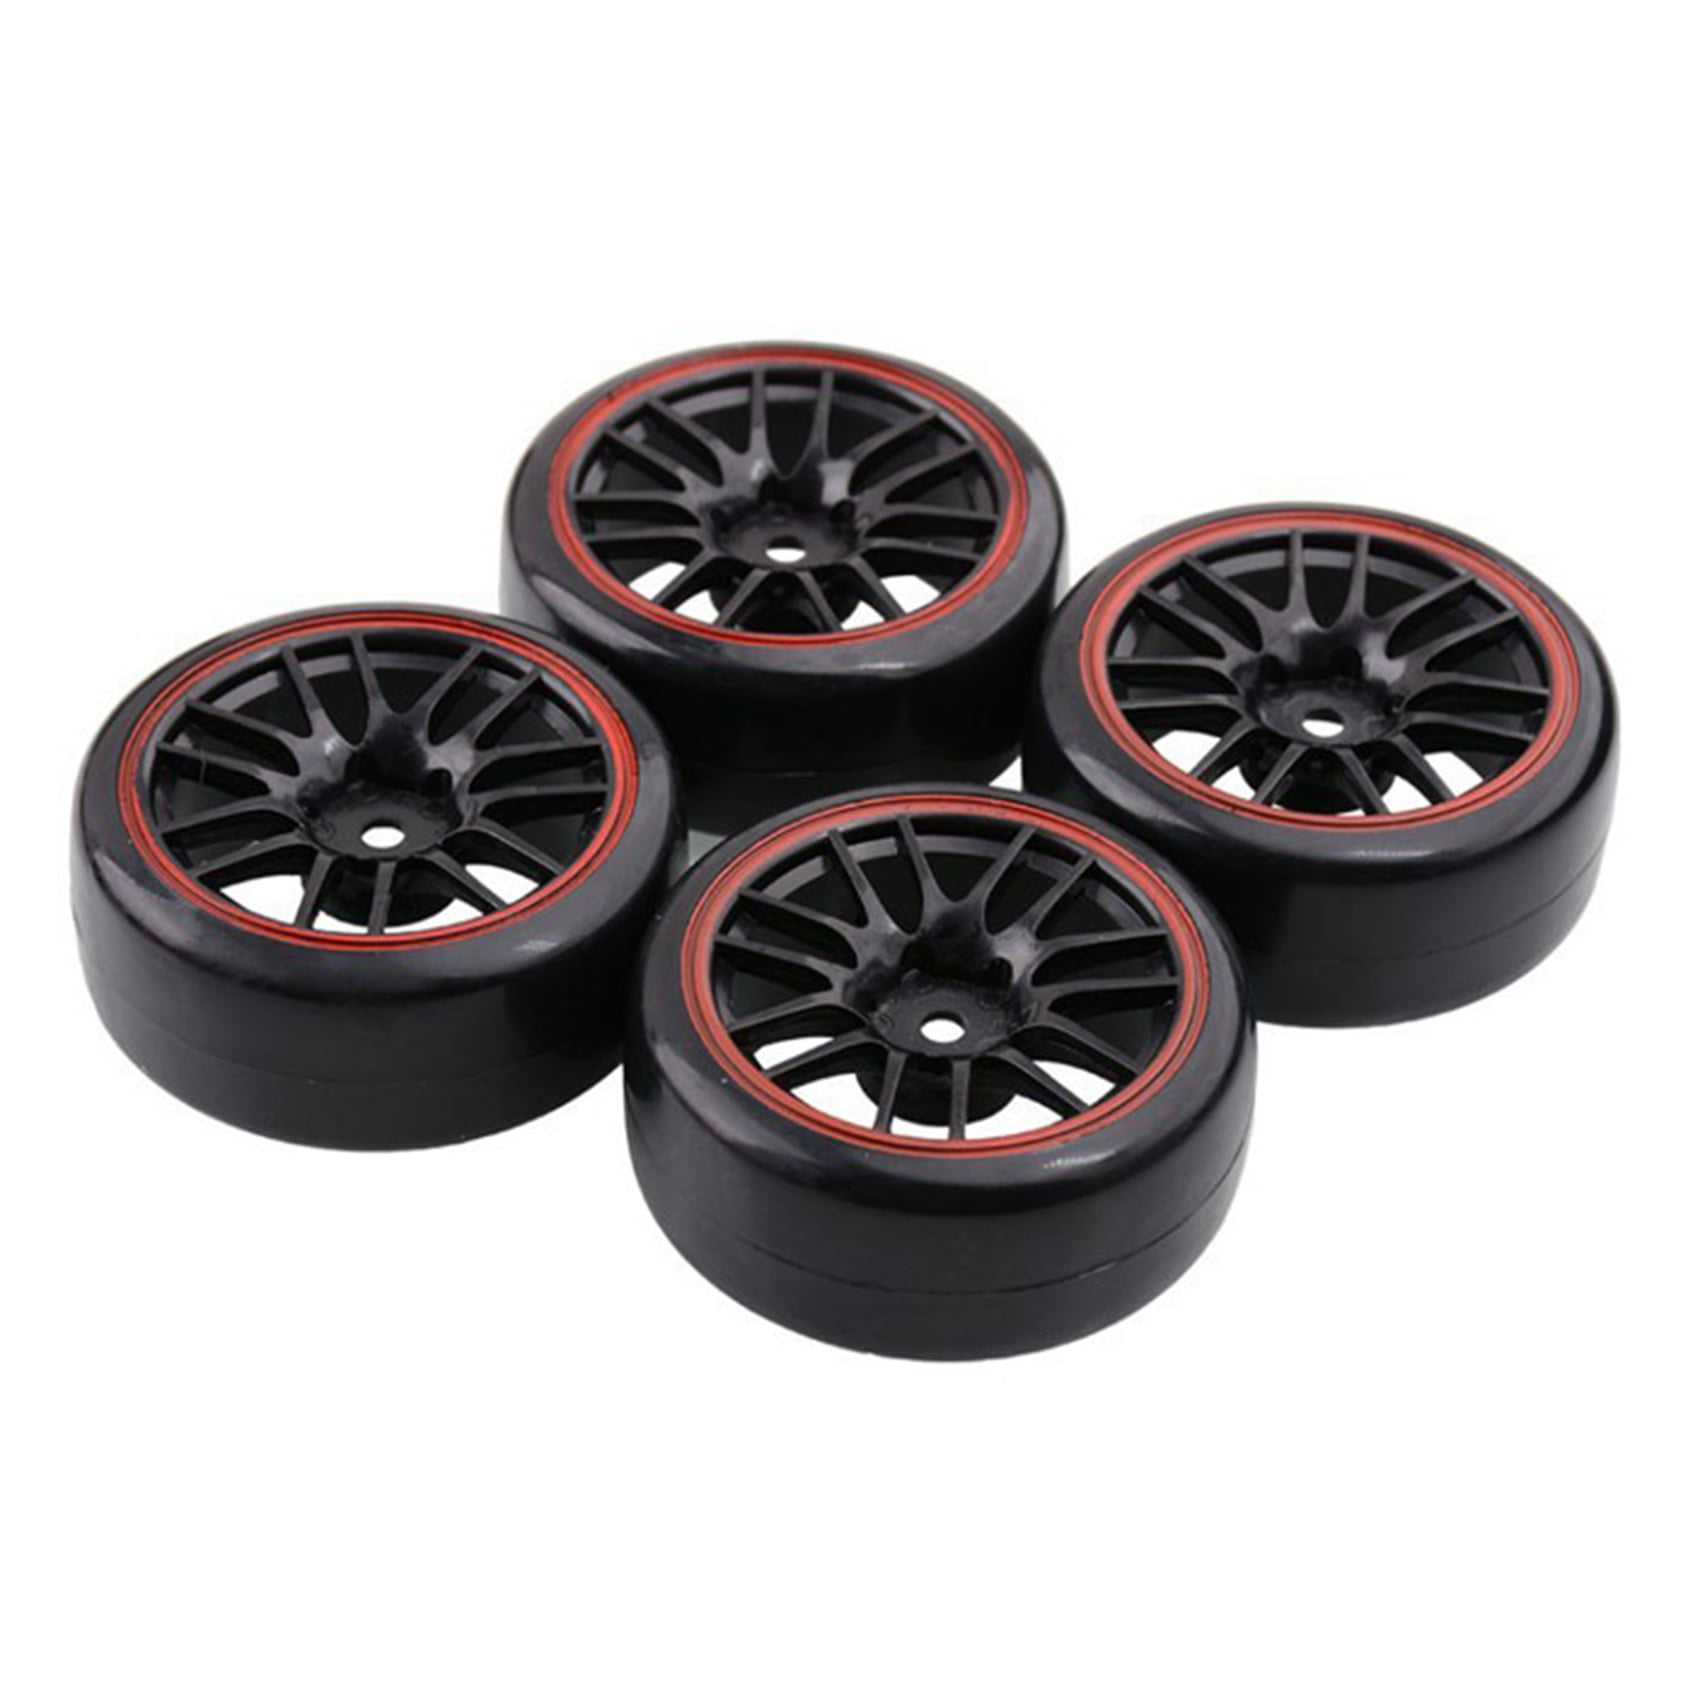 LAFEINA 1/10 Drift Car Tire and Wheel Set Pre-Glued Hard Plastic Tyres Wheels Rims for Traxxas Tamiya HSP HPI Kyosho 1:10 RC On-Road Drifting Car Red 